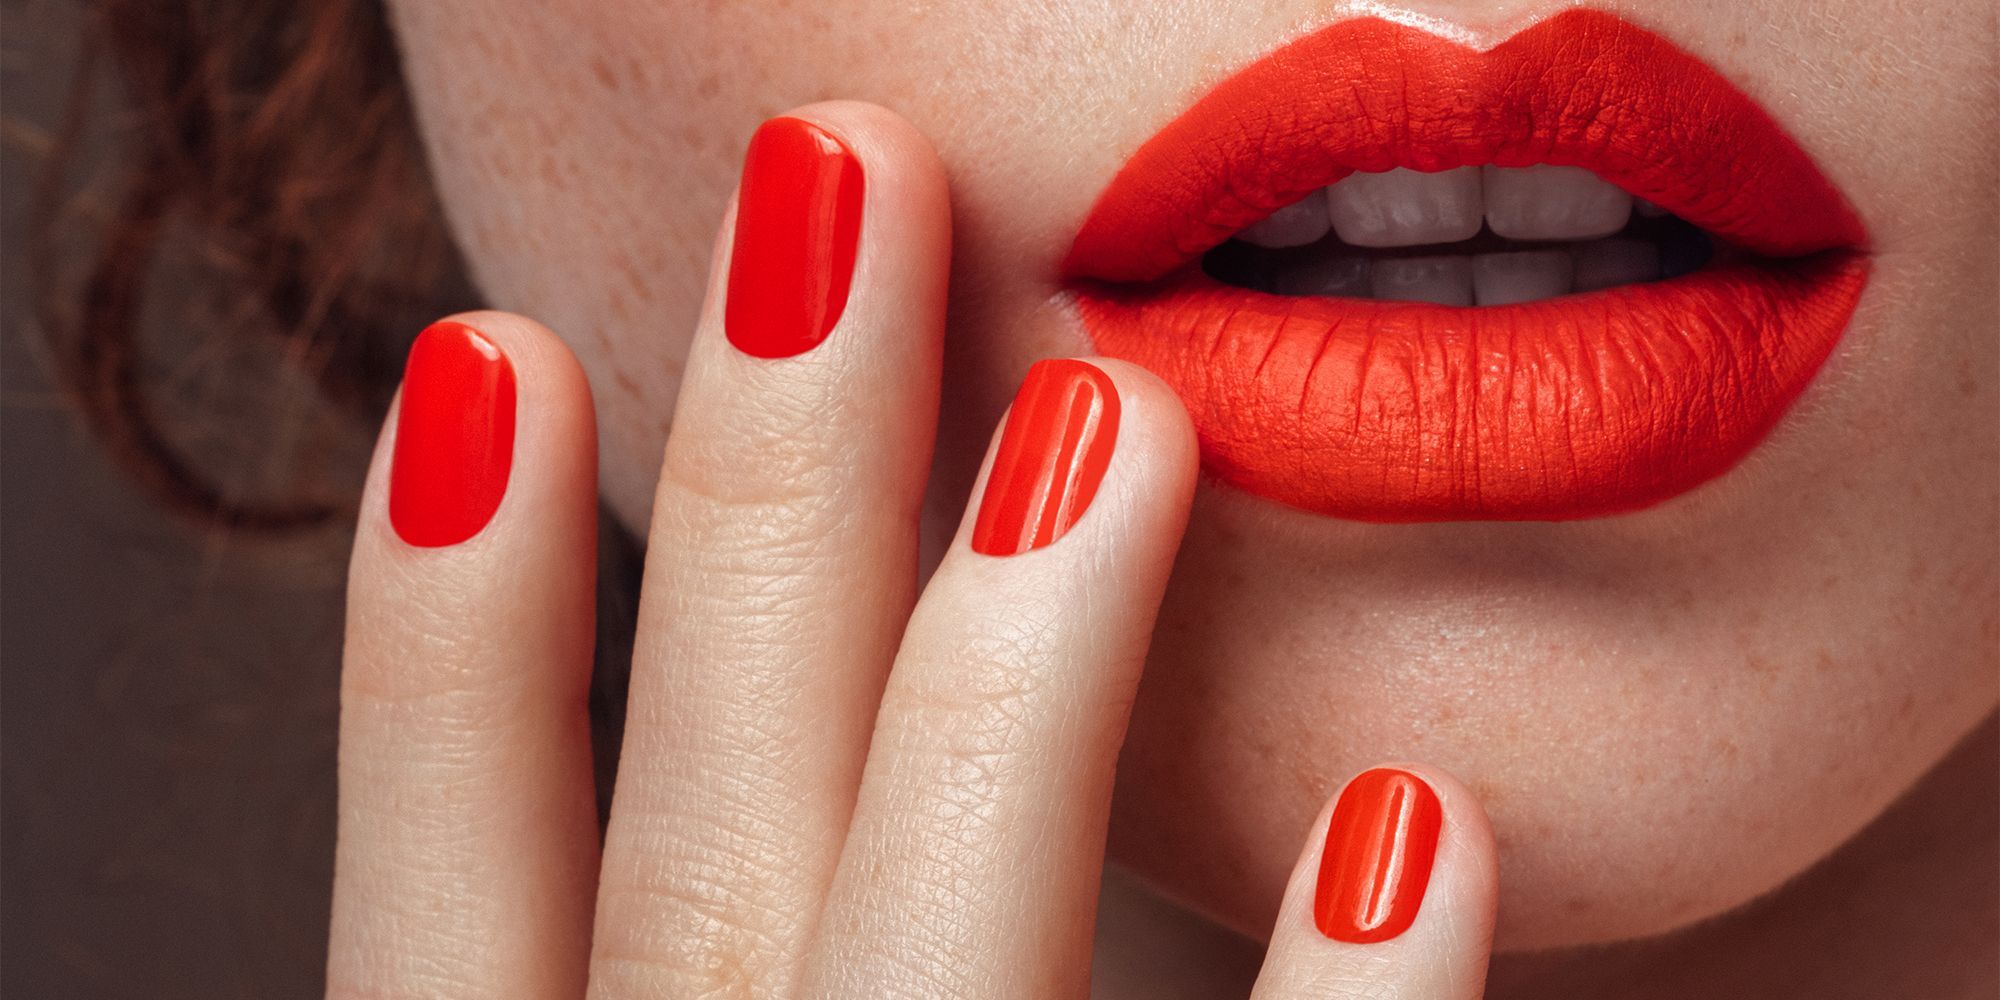 Shellac Nails Vs. Gel Manicure: What to Know About Shellac Nails